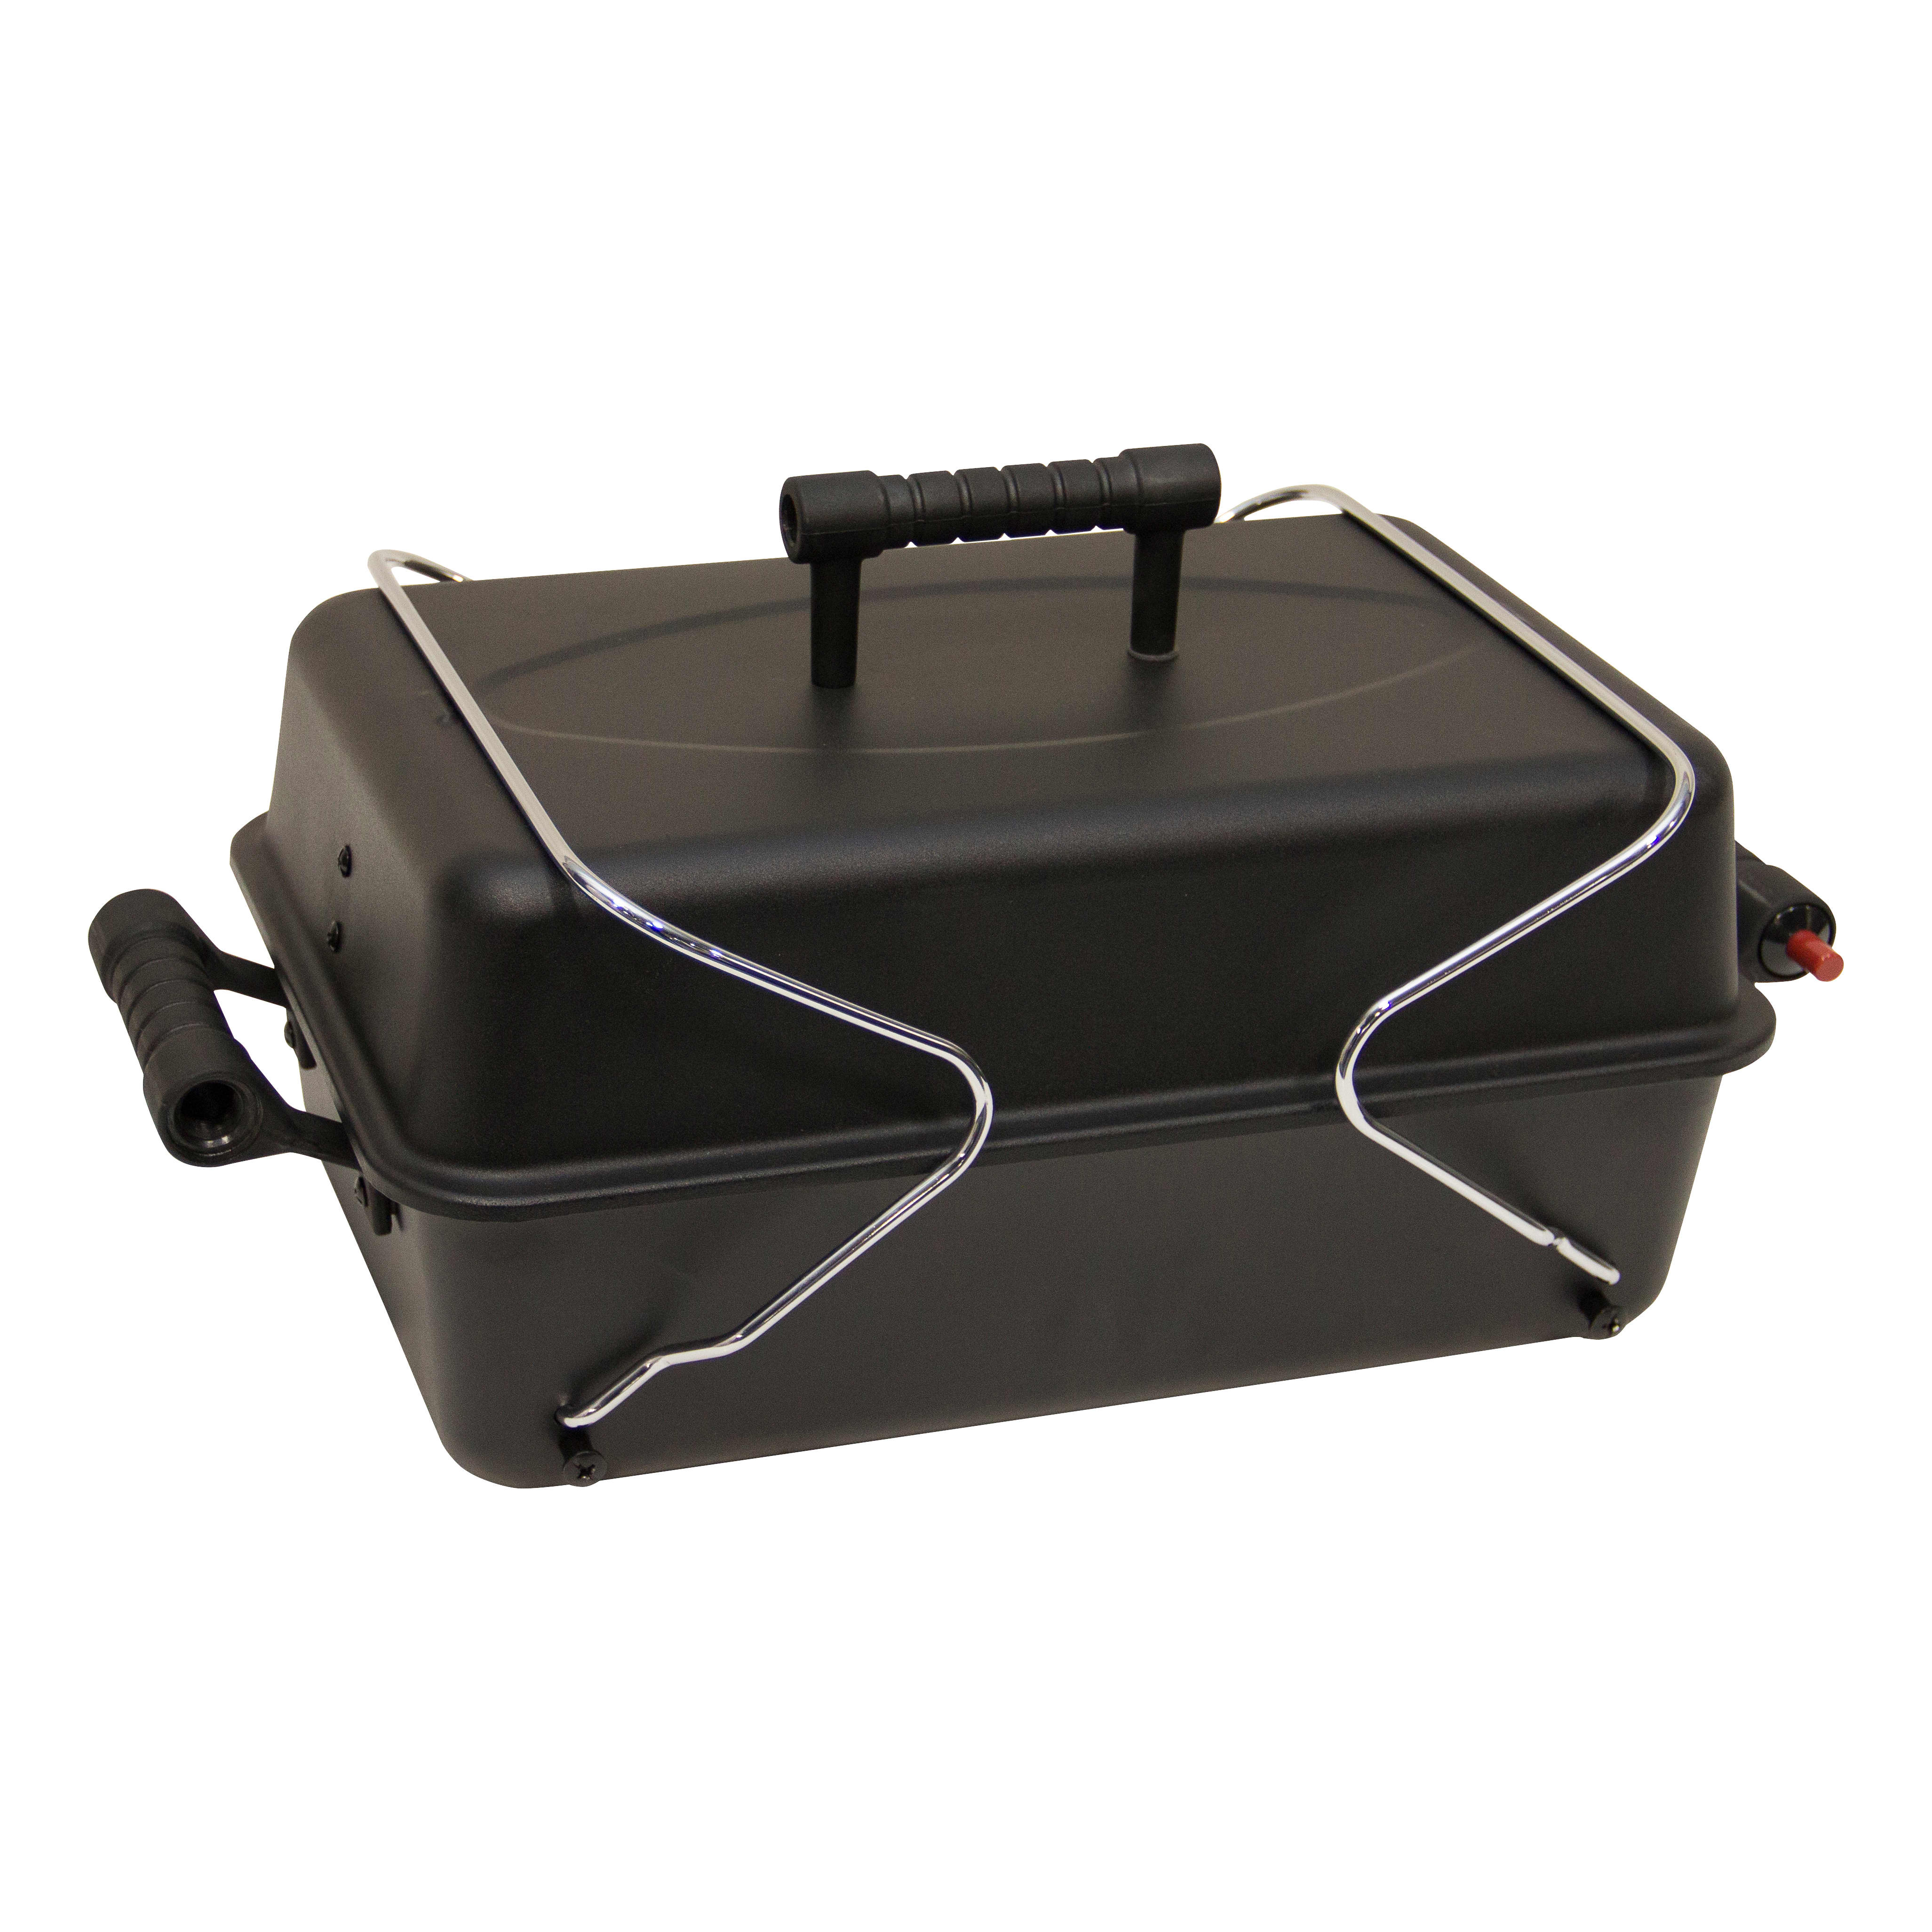 Char-Broil® Gas Grill 190 Deluxe